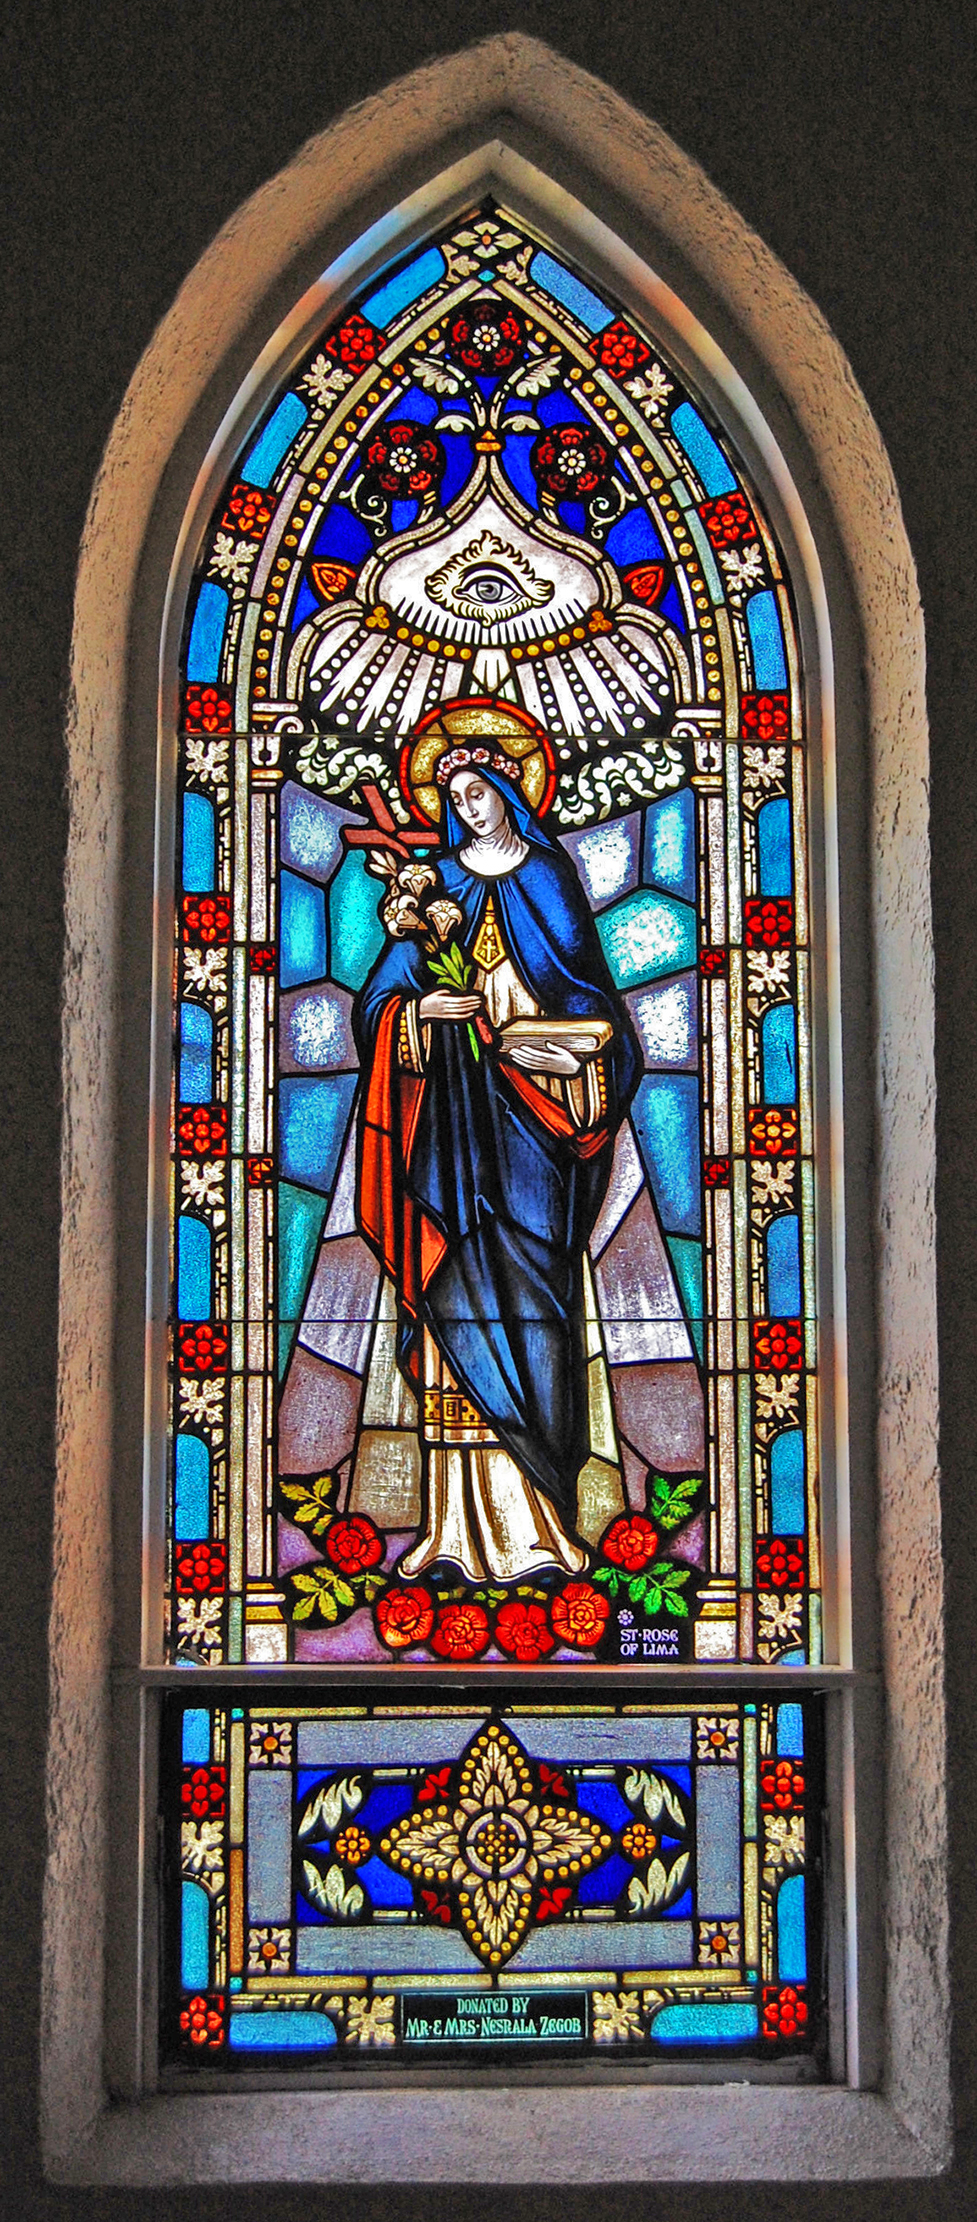 a stained glass window depicting Saint Rose of Lima in the sanctuary of Most Precious Blood Catholic Church in San Luis Colorado on 3 June 2009. The church is now known as Sangre de Cristo.